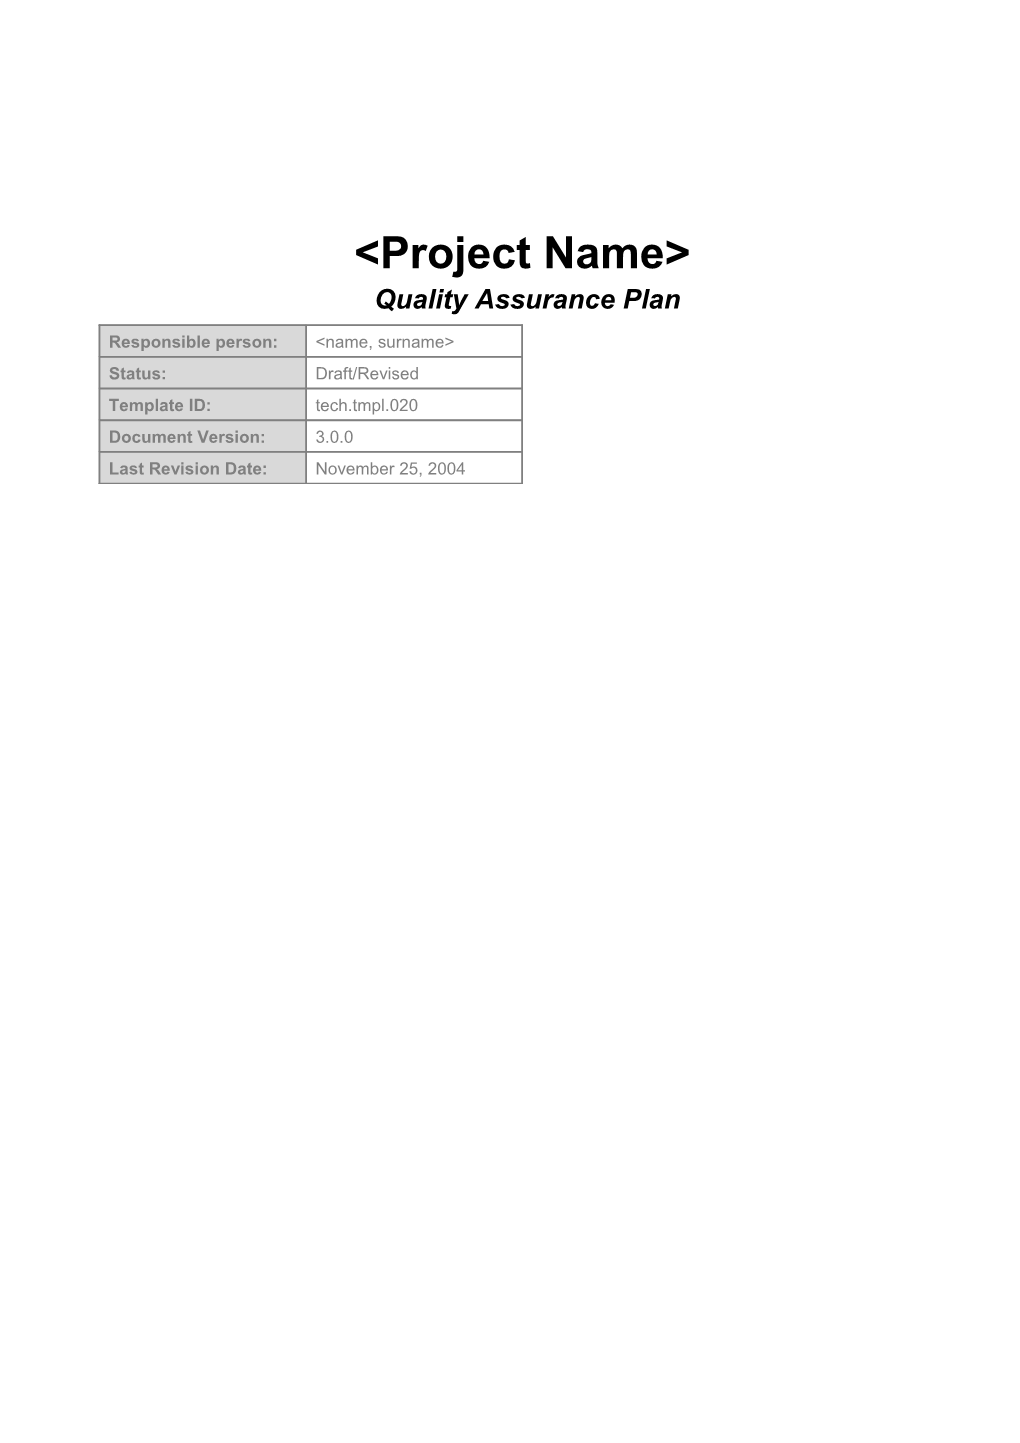 Project Name Quality Assurance Plan